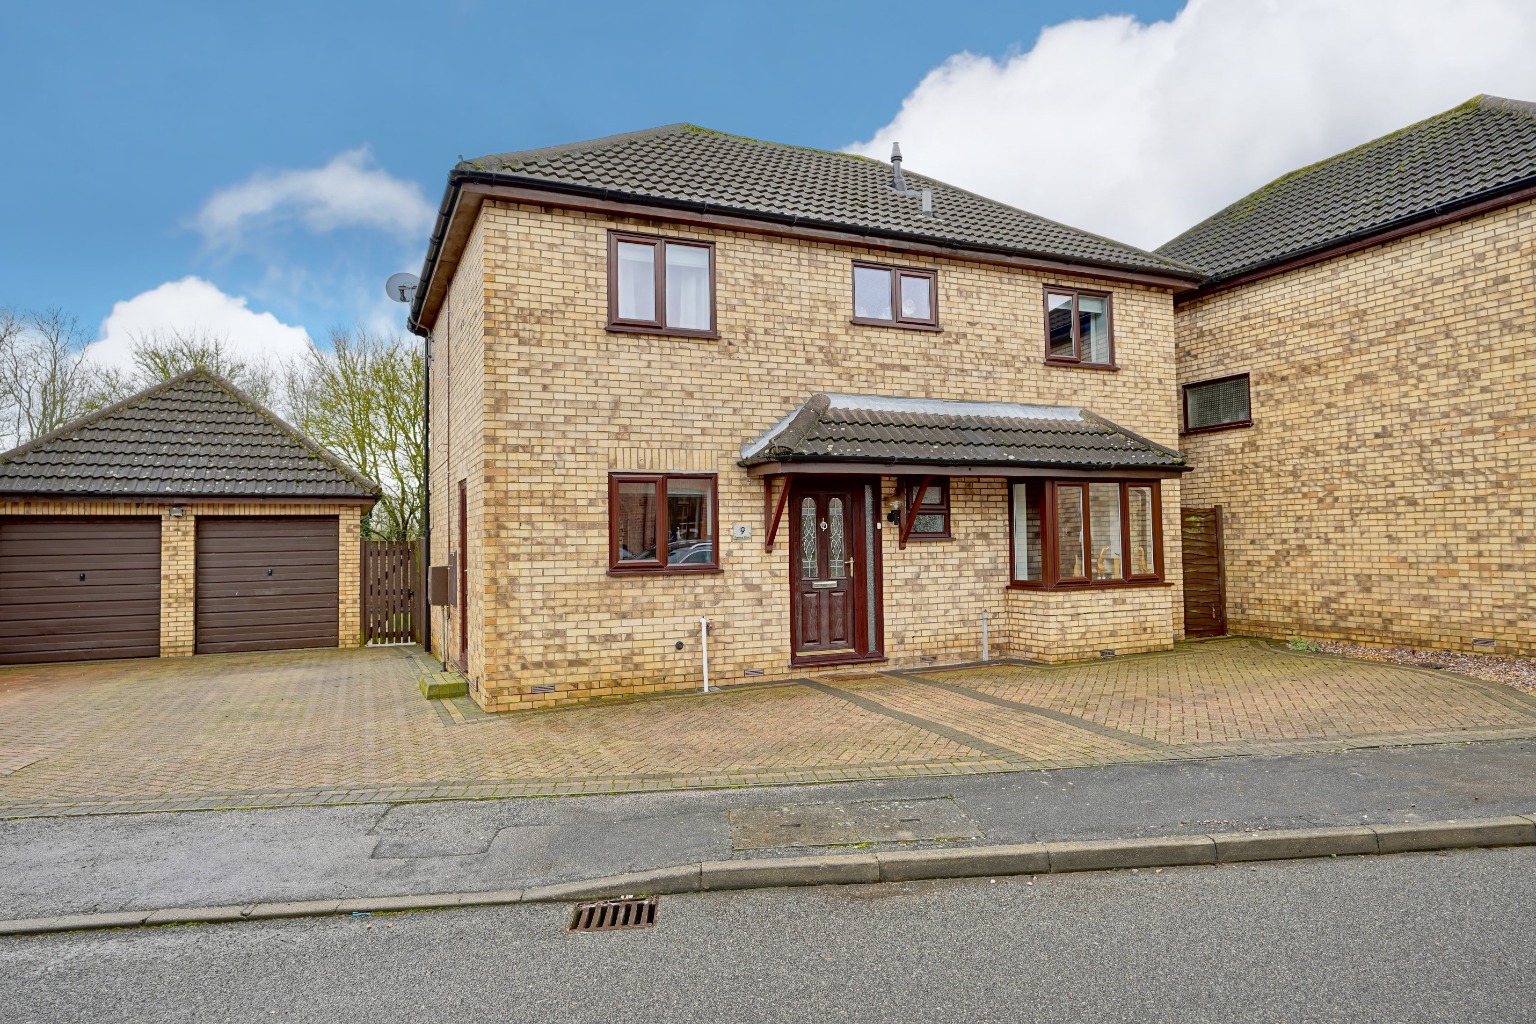 4 bed detached house for sale in Pasture Close, Huntingdon  - Property Image 1